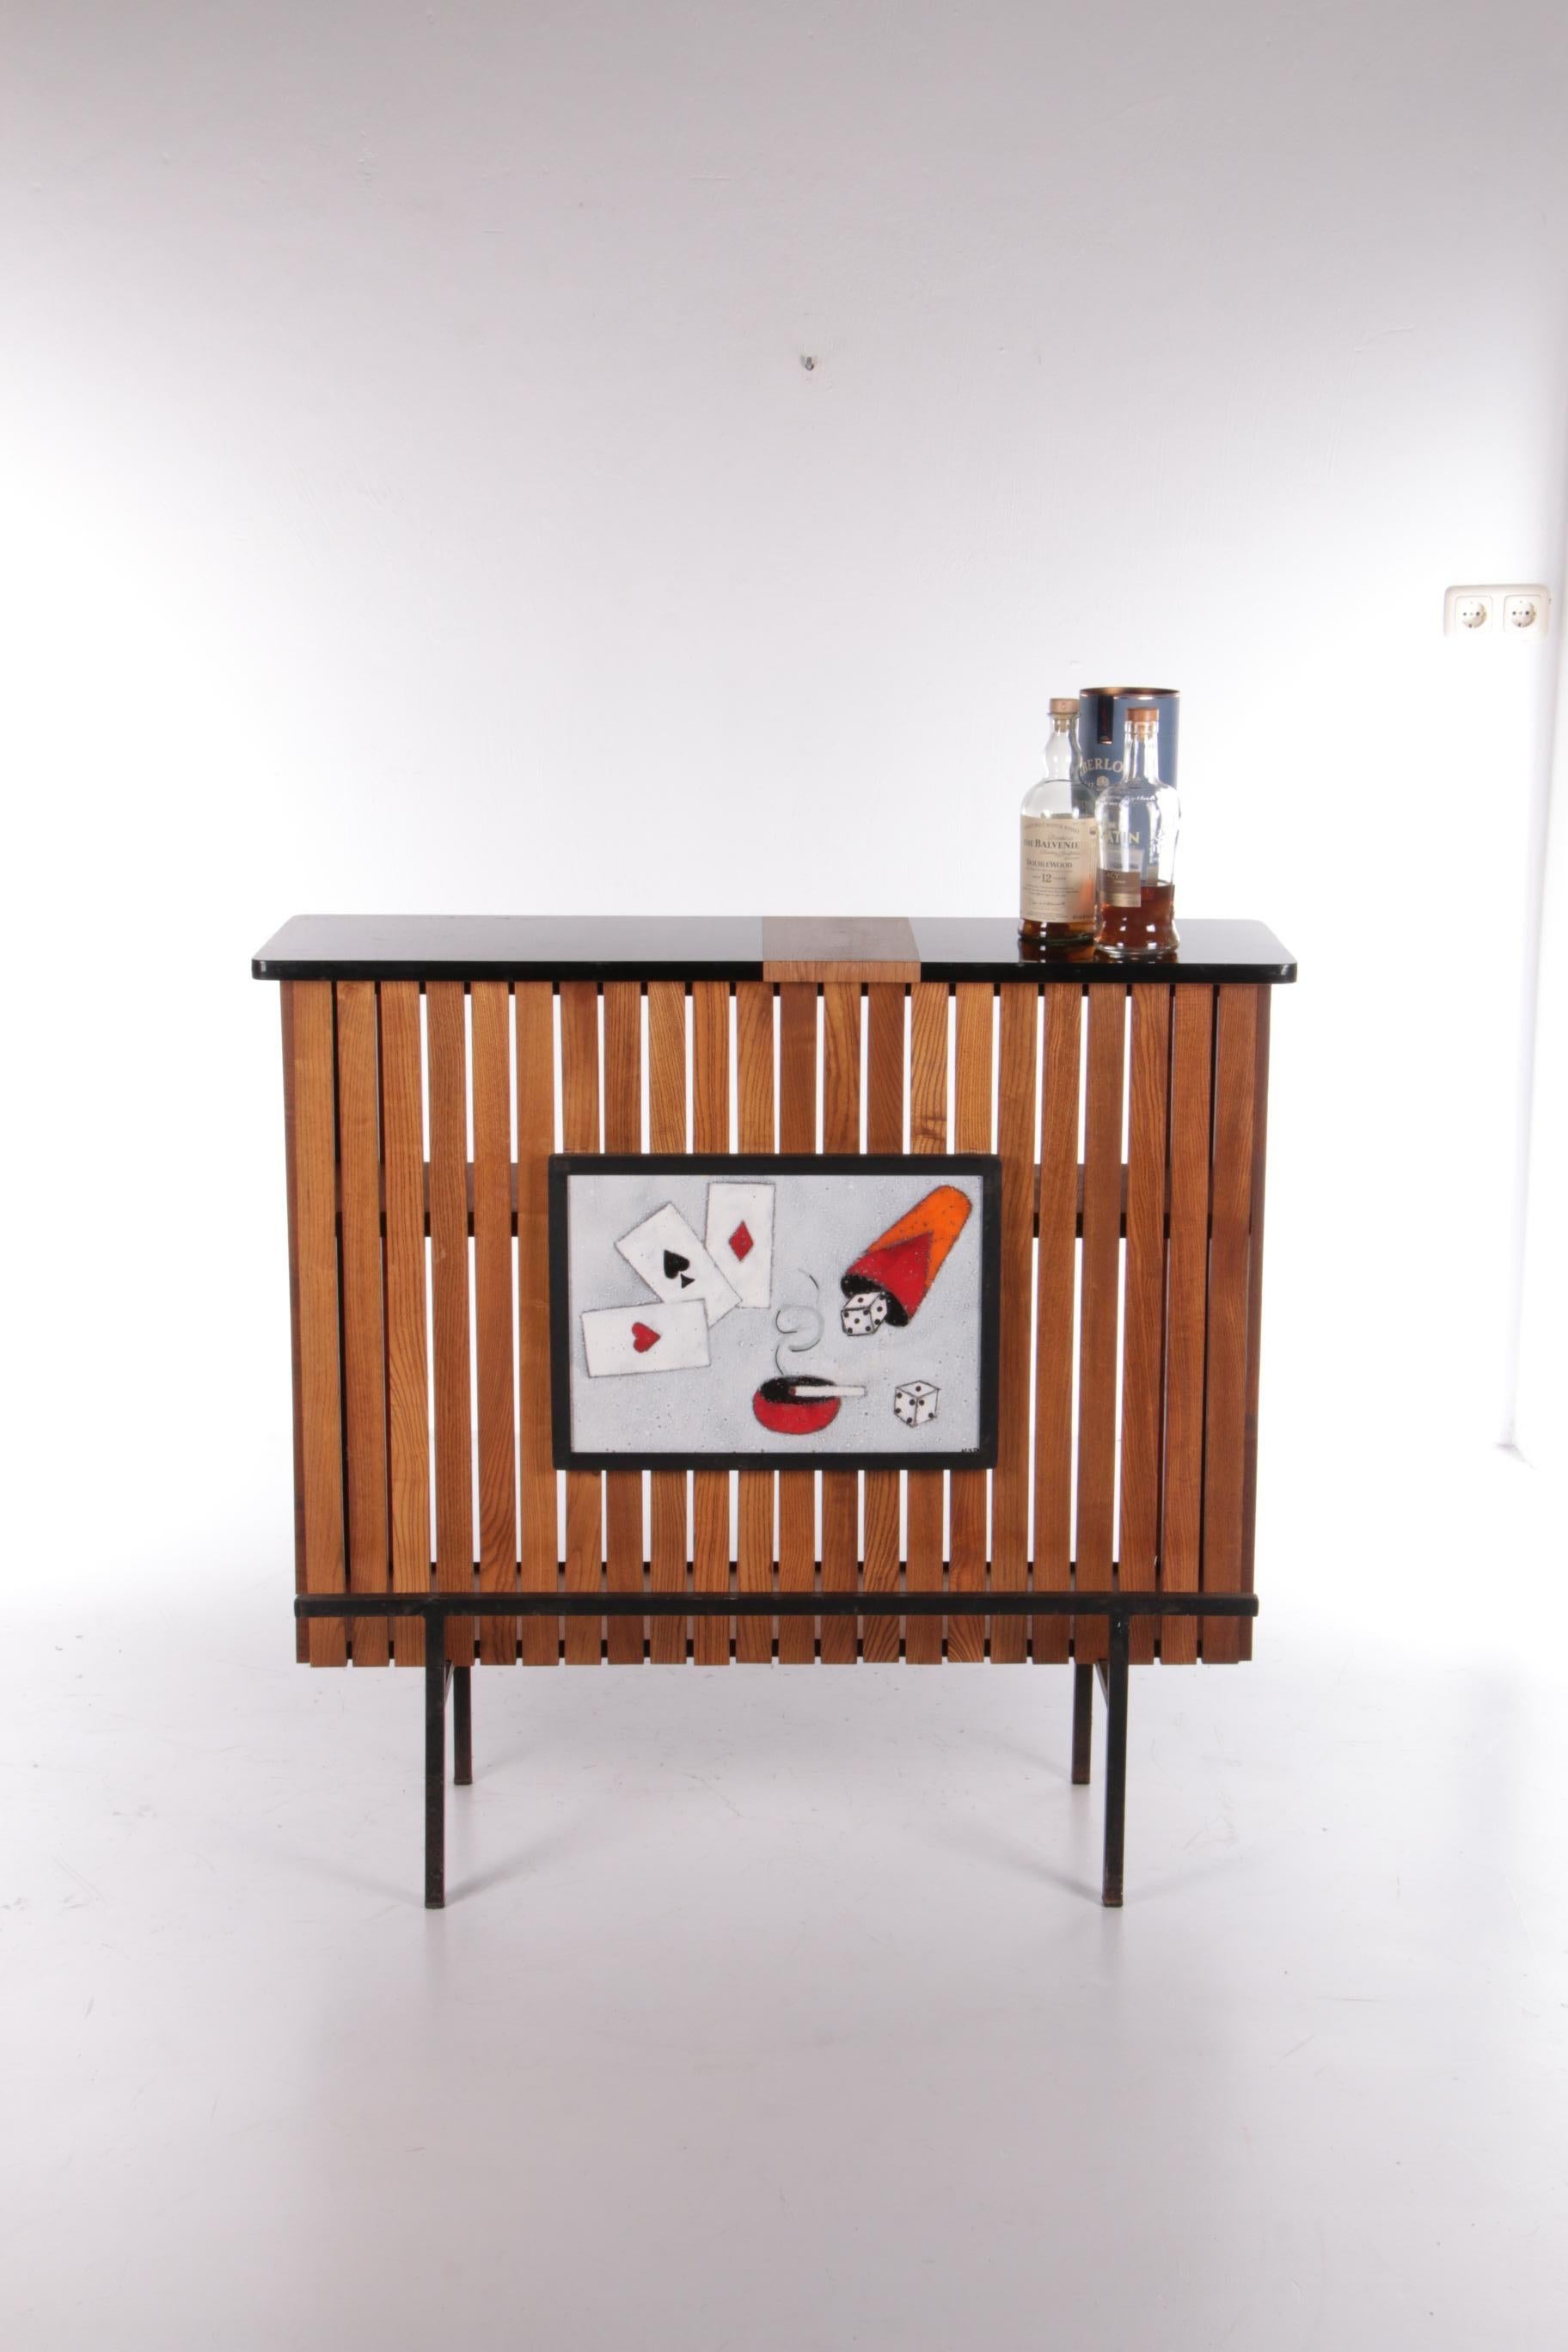 Vintage Oak Bar design by Jacques Adnet, 1960s France.


Oak and formica bar furniture. With a ceramic tile.

Original design by Jacques Adnet.

Adnet designed this piece in the 50's and it was produced in the 60's with several